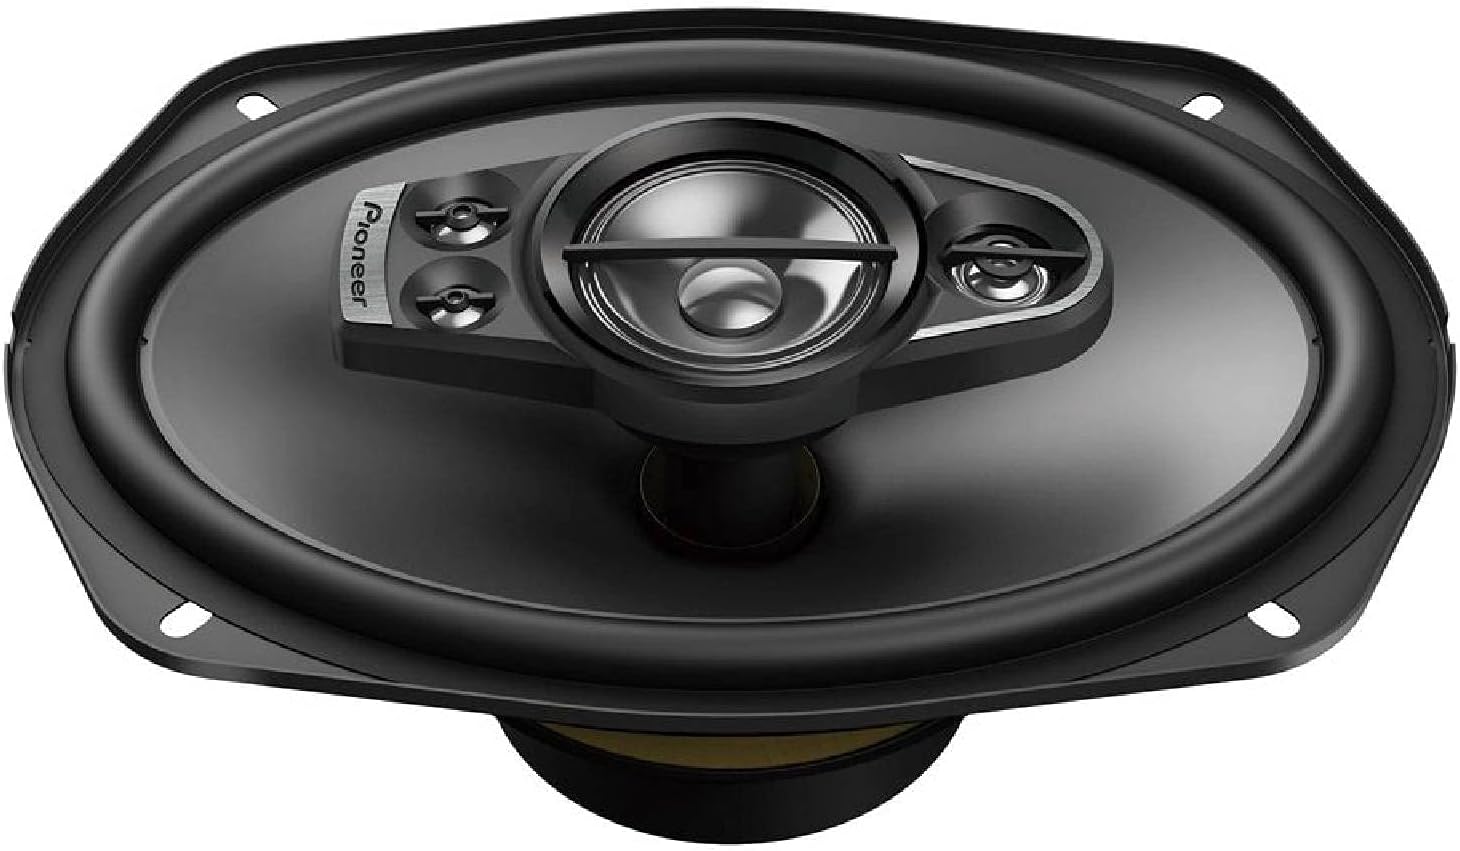 Pioneer TS-A6987S 6" x 9" 5-Way 700W Max 4-Ohms Car Audio Coaxial Speakers